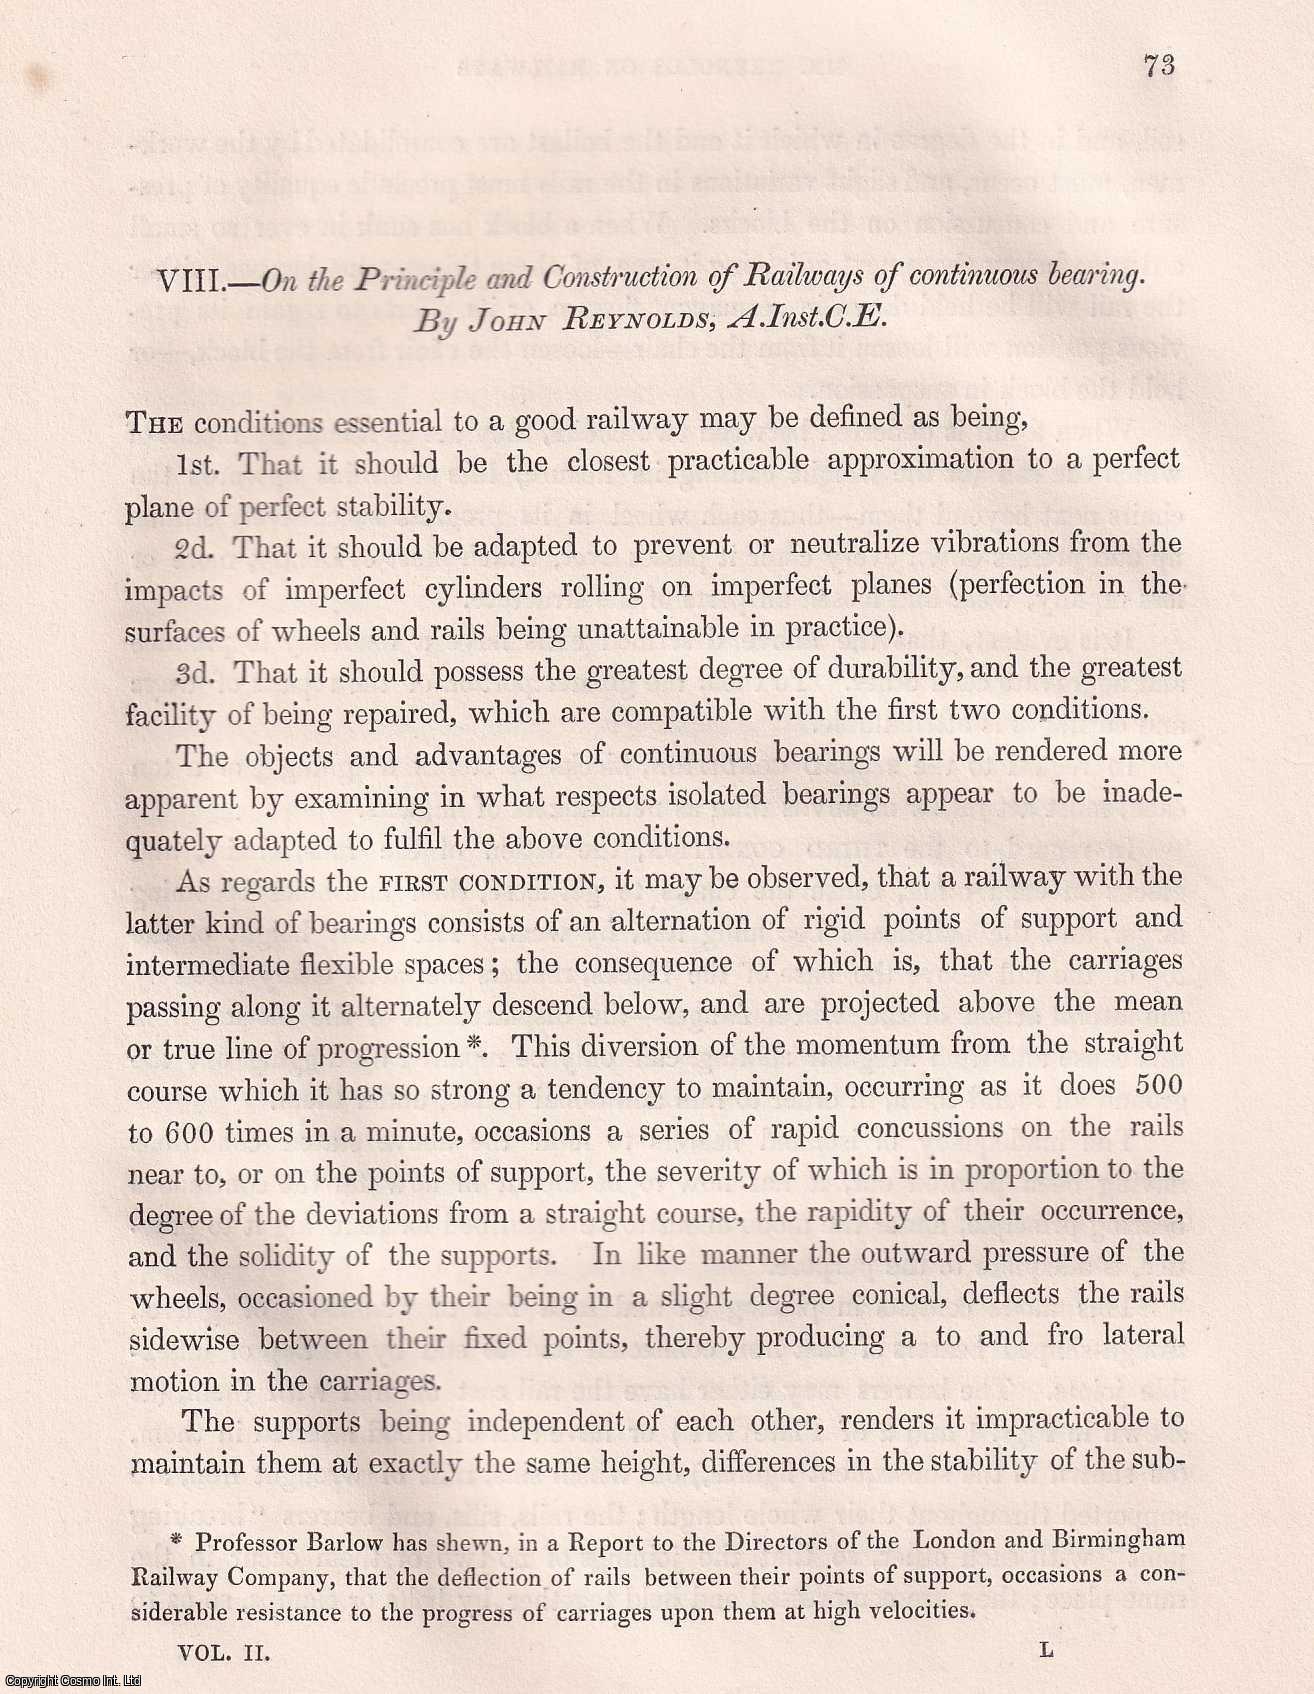 John Reynolds, A.Inst.C.E. - On The Principle & Construction of Railways of Continuous Bearing. An article from the Institution of Civil Engineers, 1842.